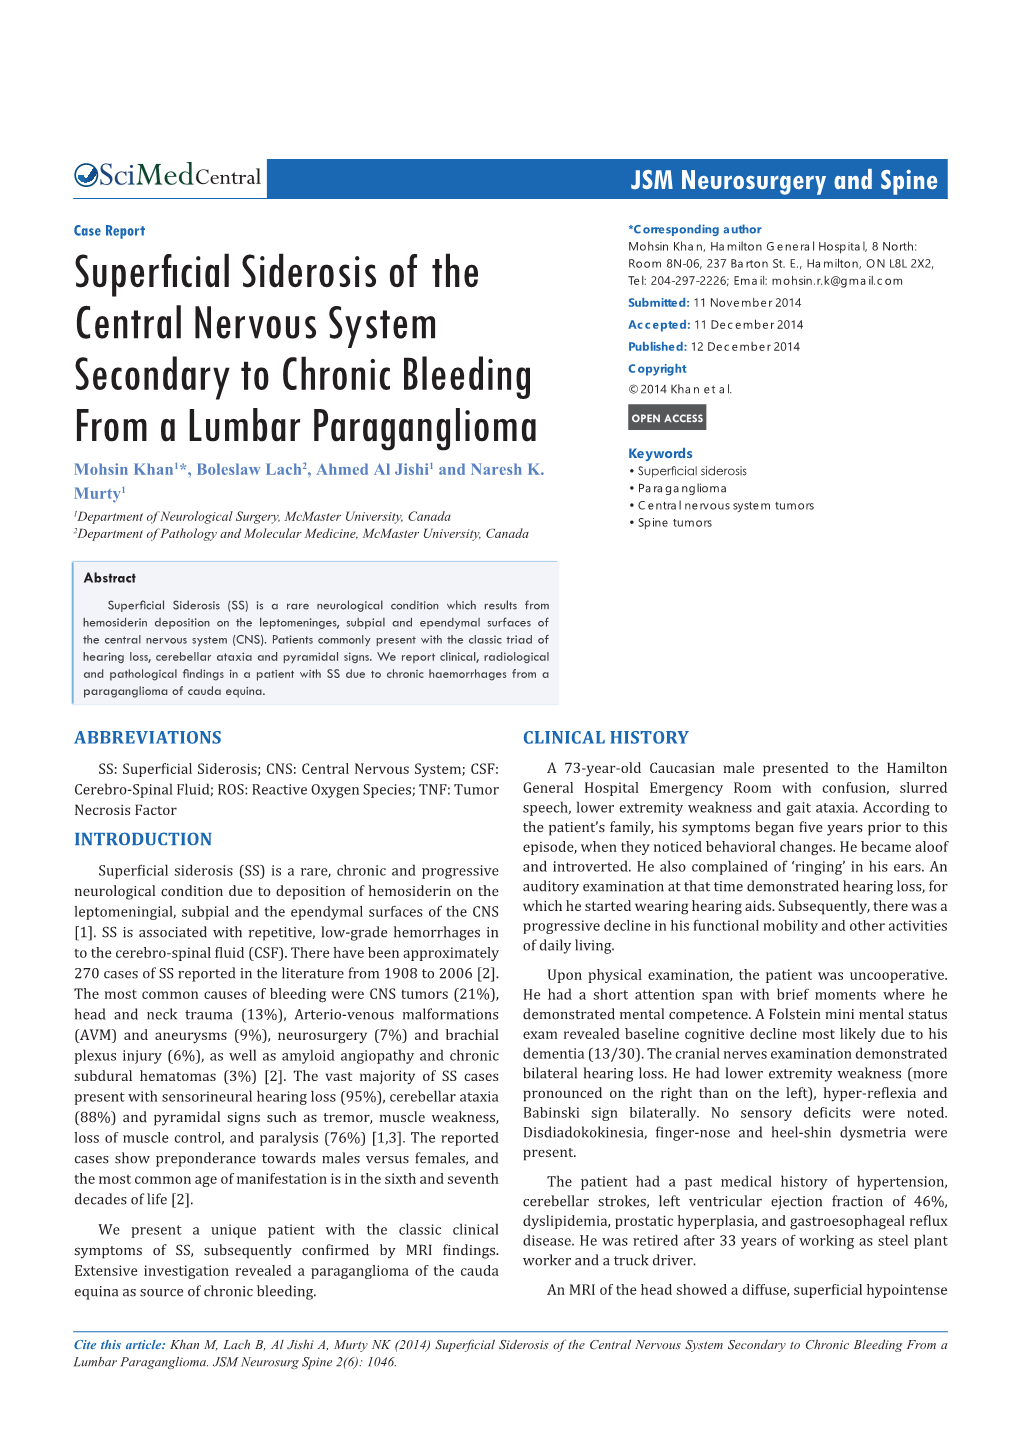 Superficial Siderosis of the Central Nervous System Secondary to Chronic Bleeding from a Lumbar Paraganglioma